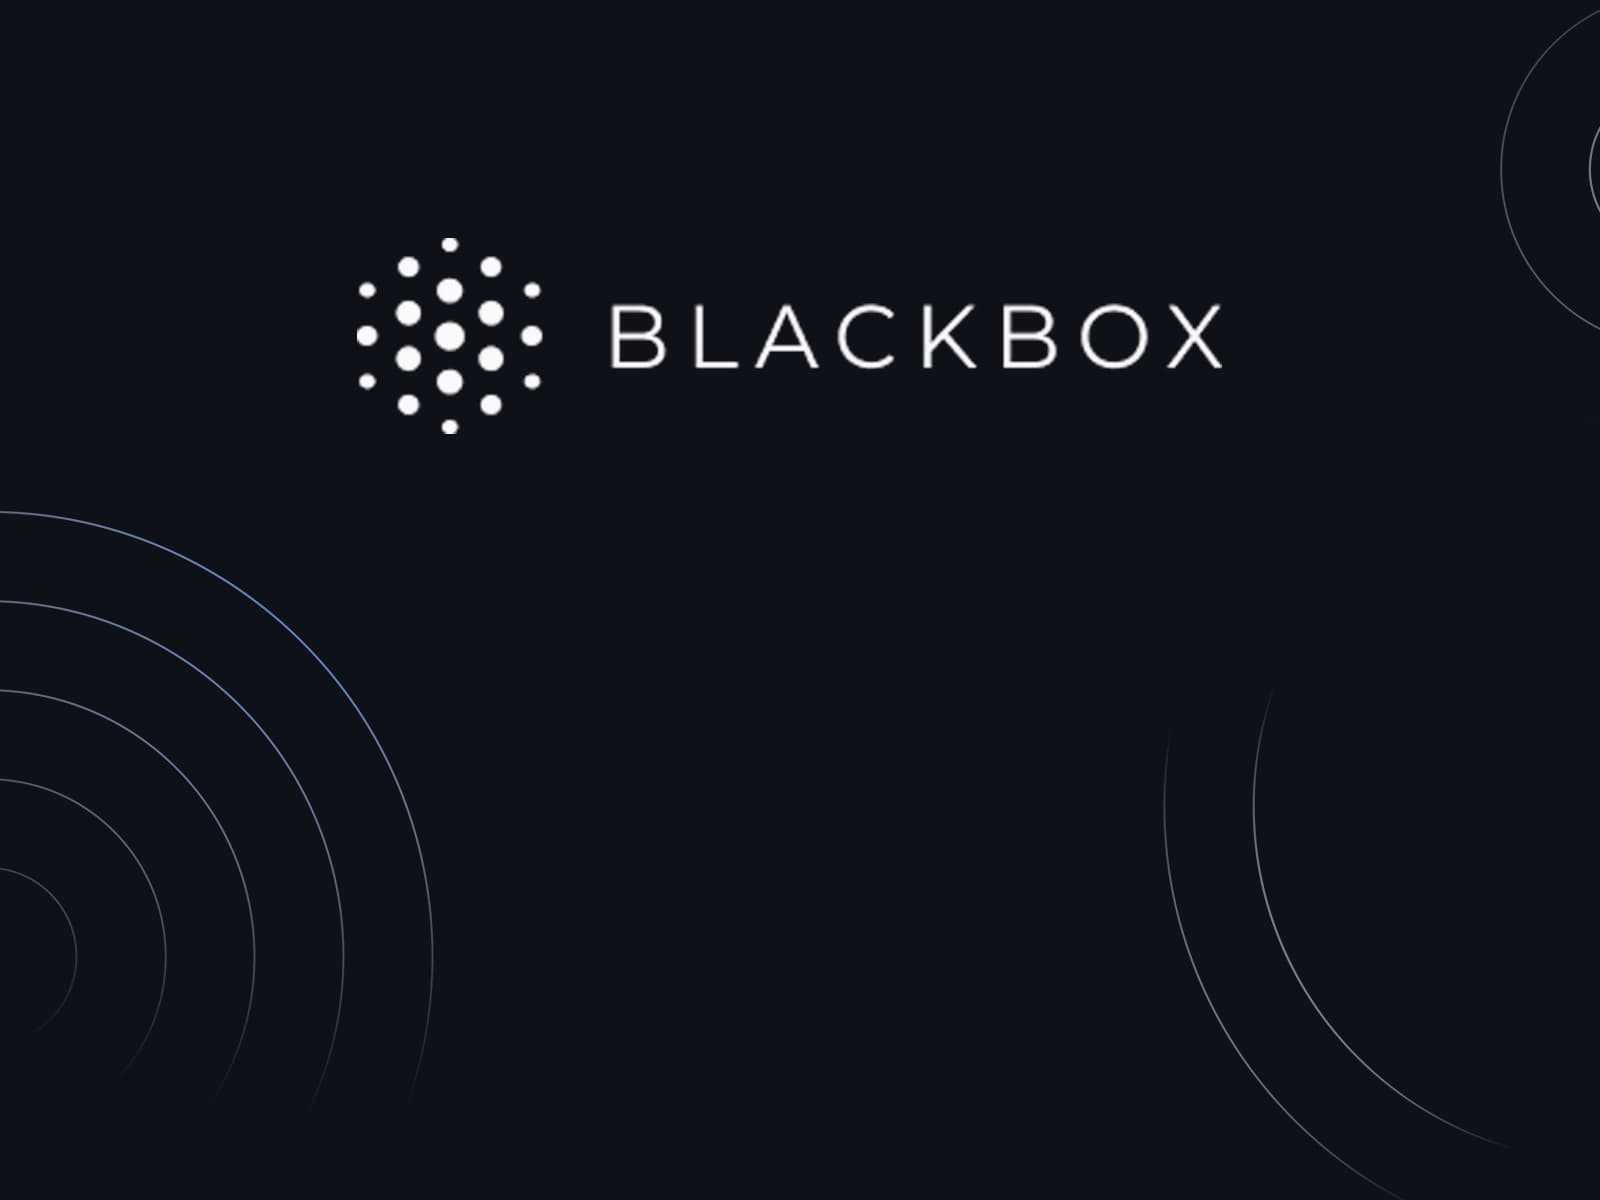 Blackbox - Turn any Question into {Code}